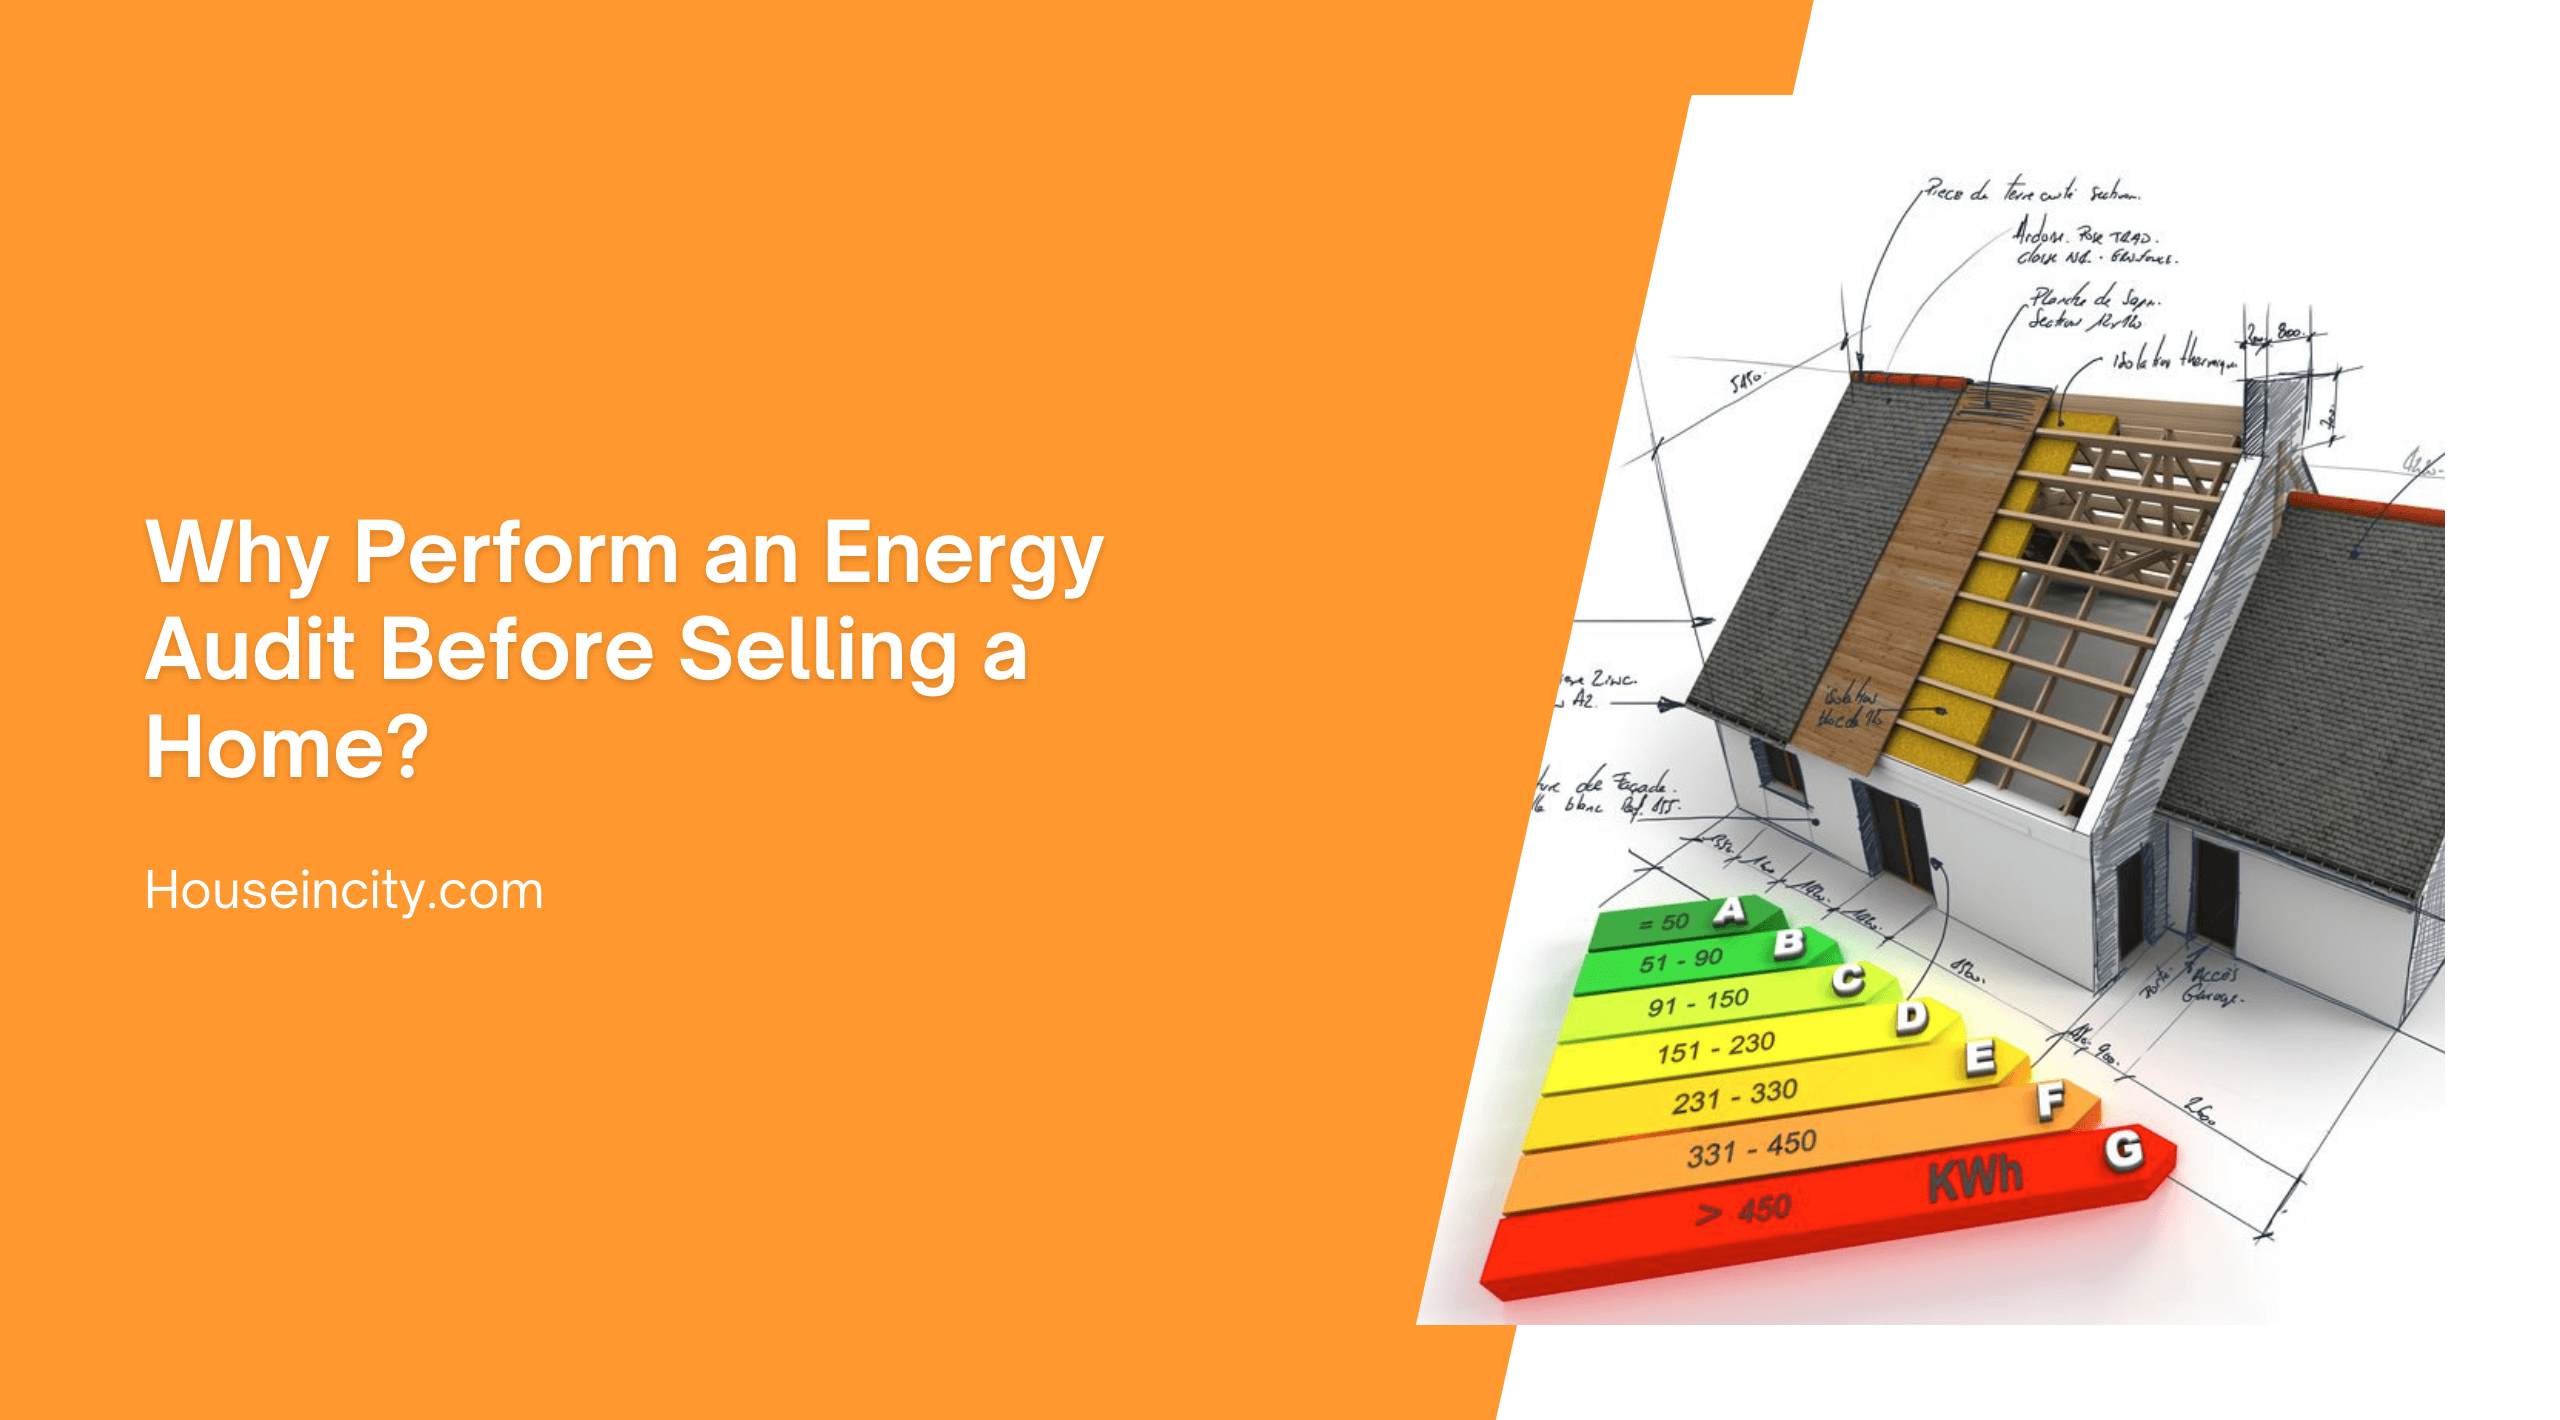 Why Perform an Energy Audit Before Selling a Home?